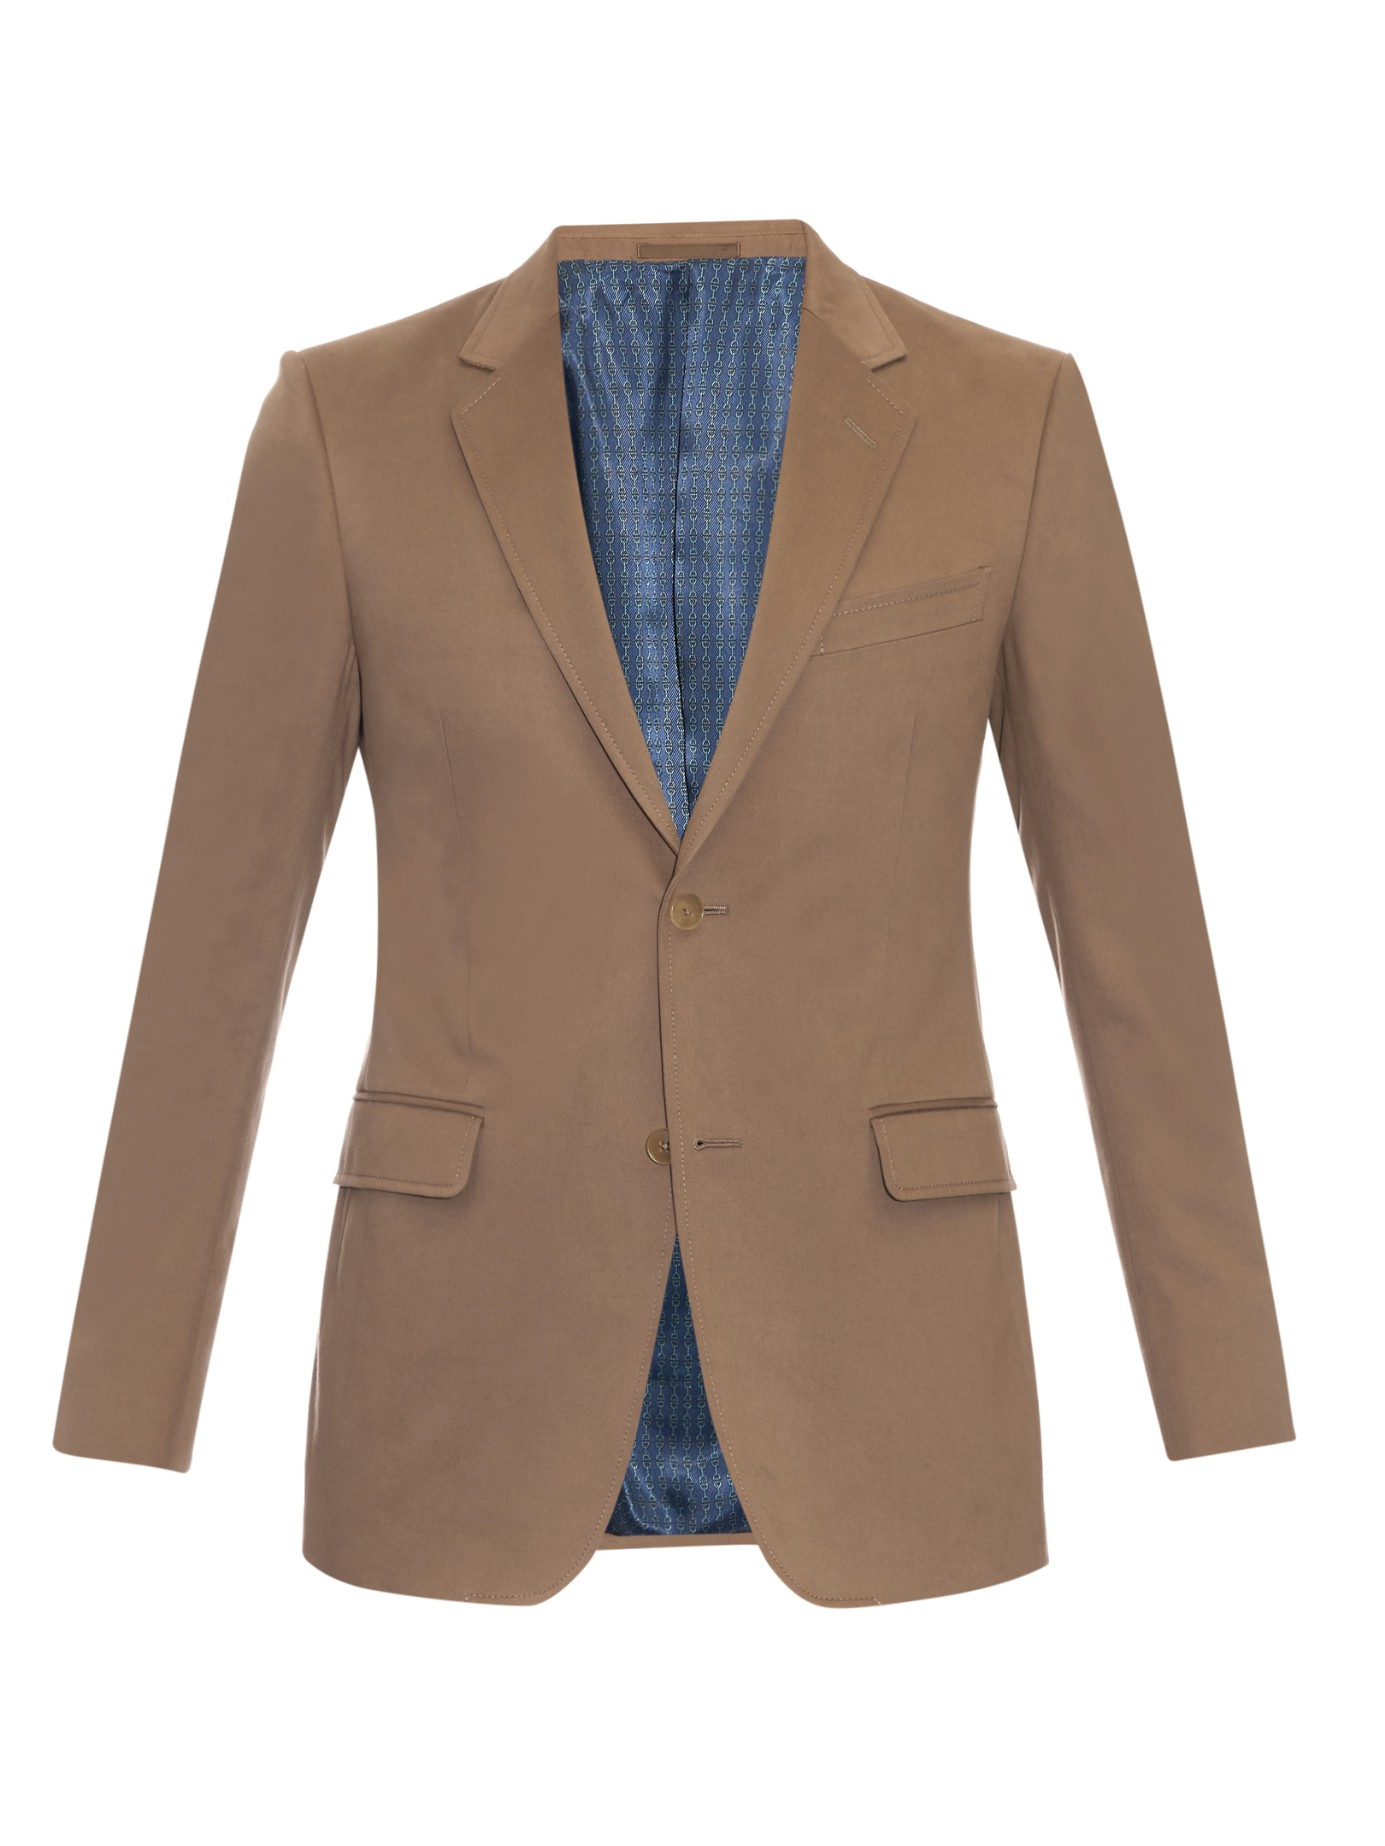 Lyst Gucci  Brera Brushed Cotton Blazer  in Natural for Men